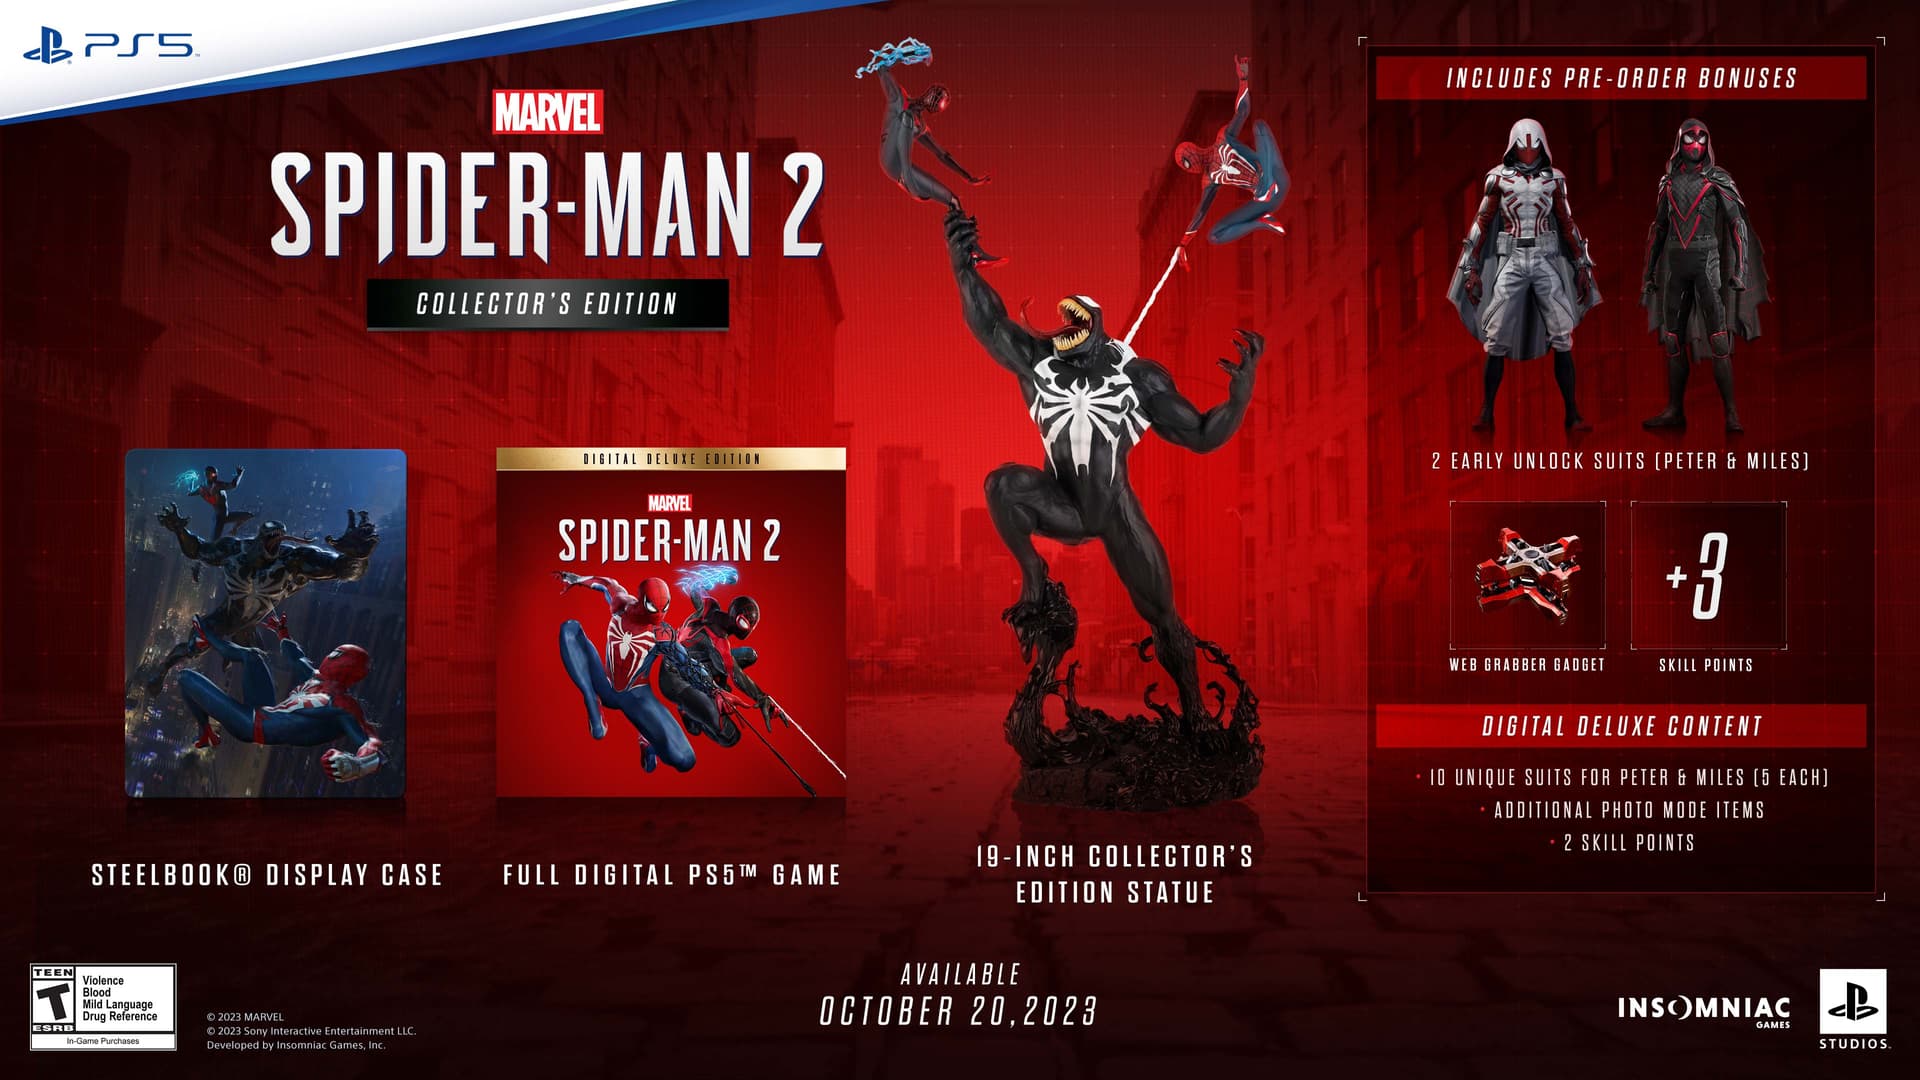 Everything included in the Collector's Edition of Spider-Man 2